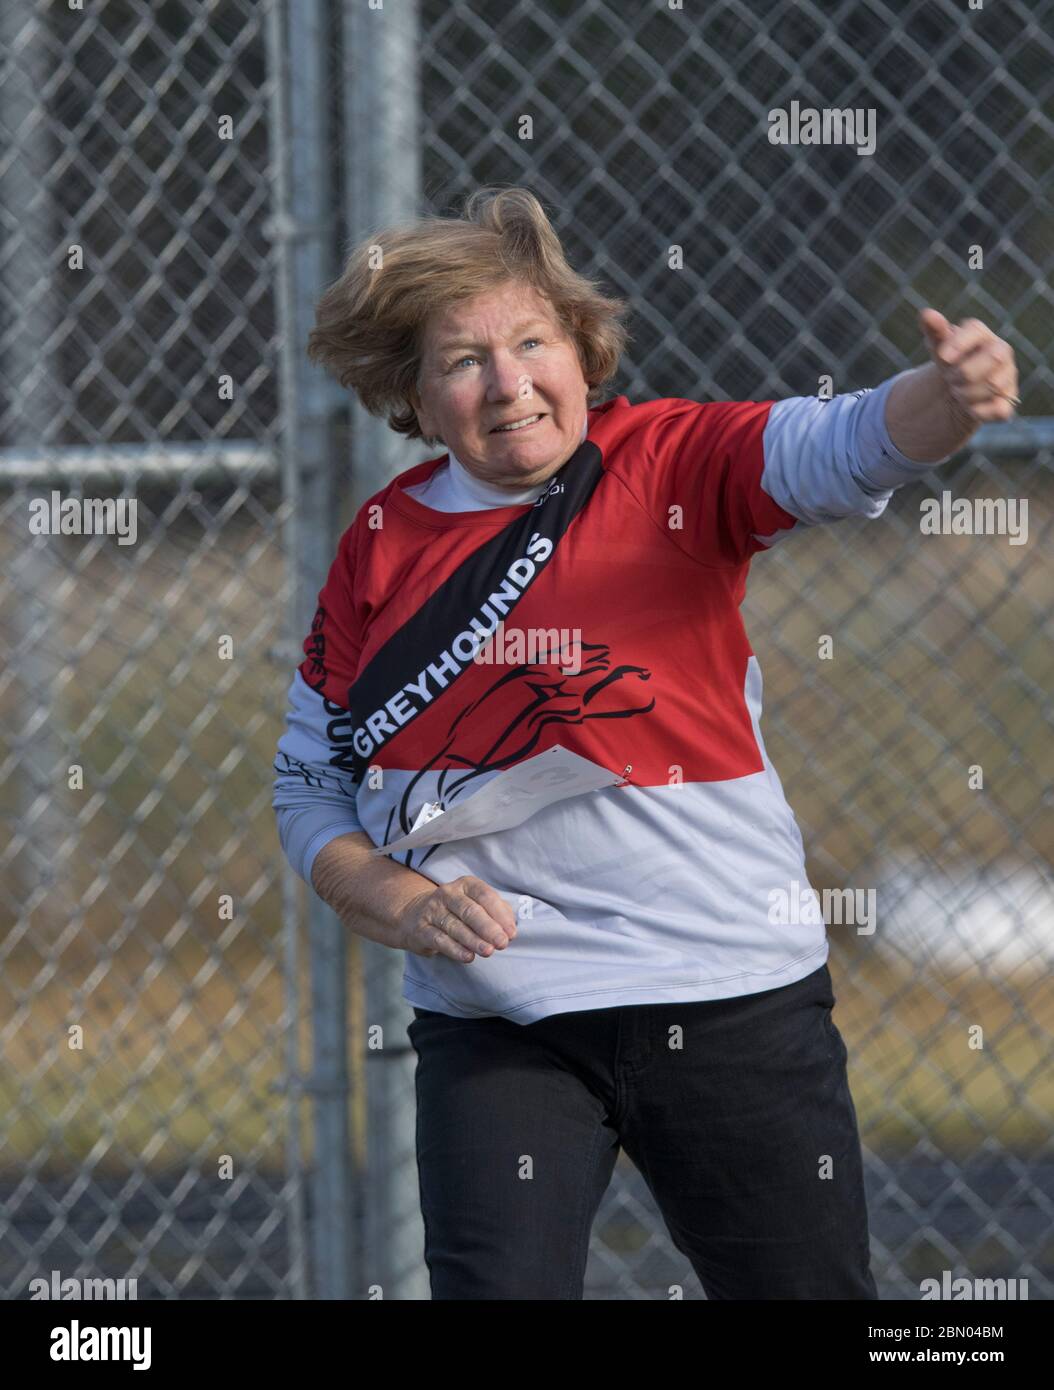 Senior Ladies Discus Throw competition. 60 year old age group Stock Photo